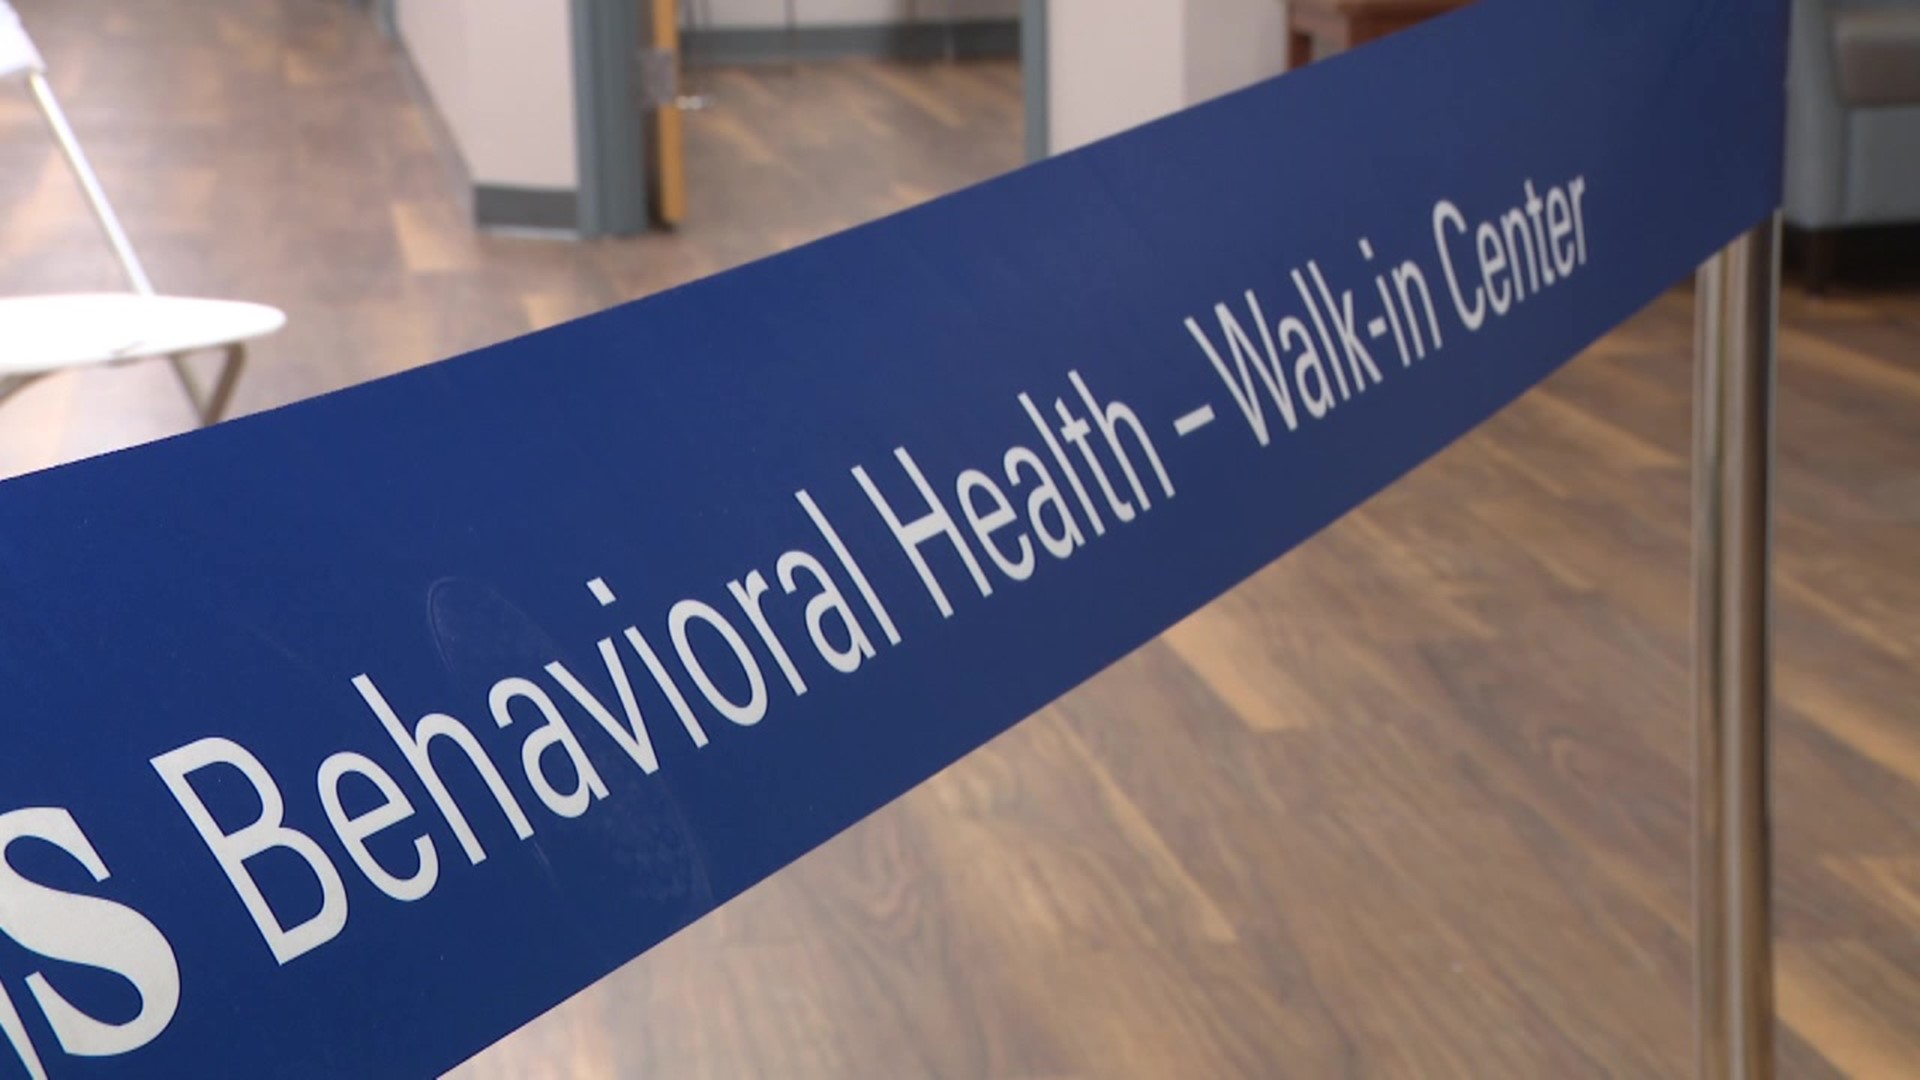 The facility will help people aged 14 and up by assessing and addressing a number of mental health concerns.